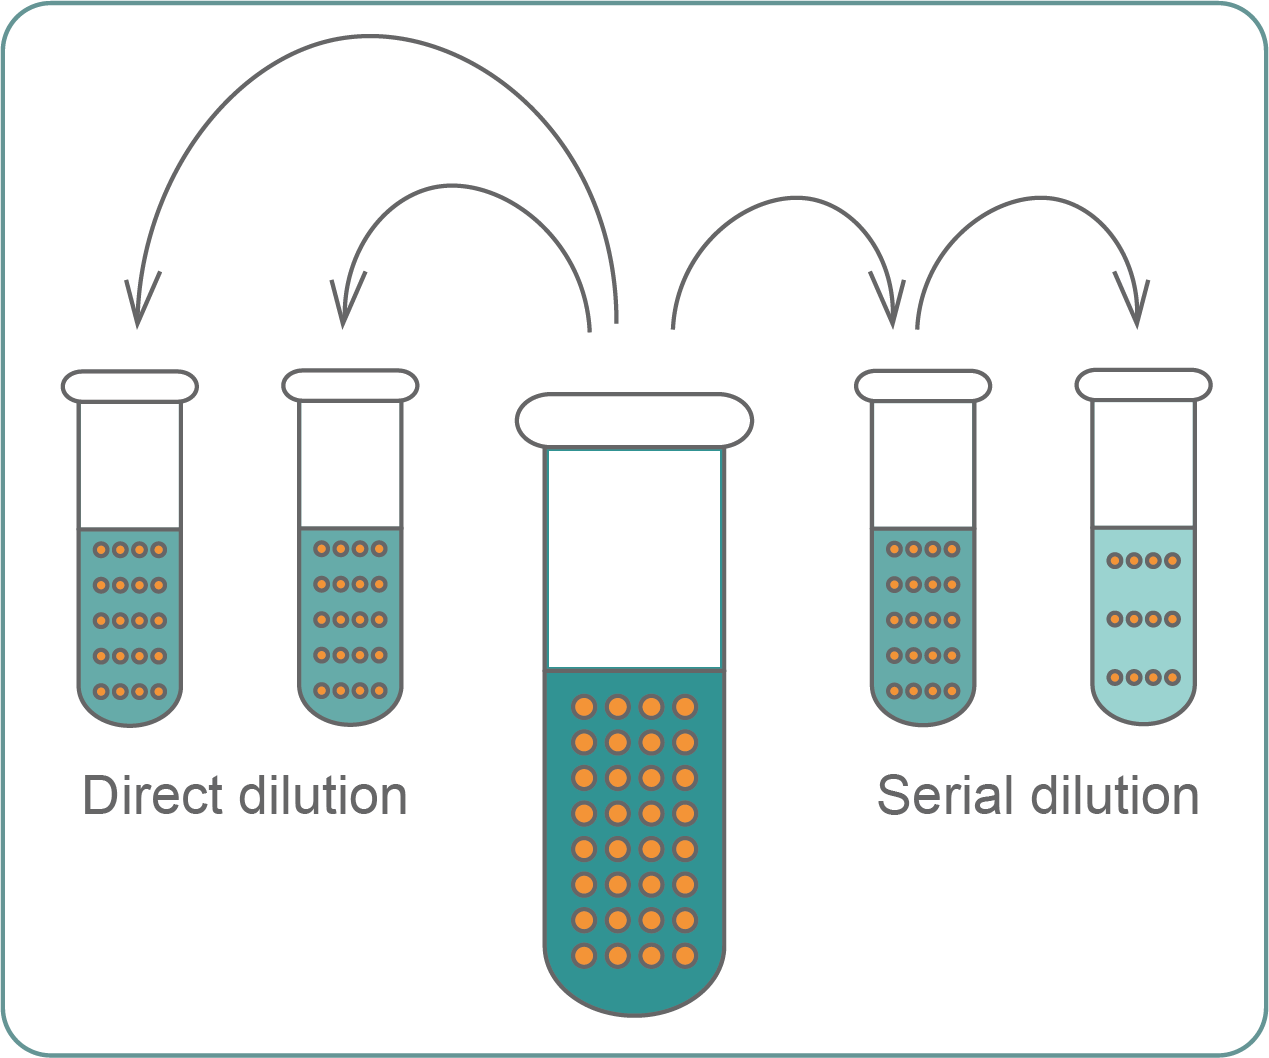 An illustration comparing a direct dilution and a serial dilution.